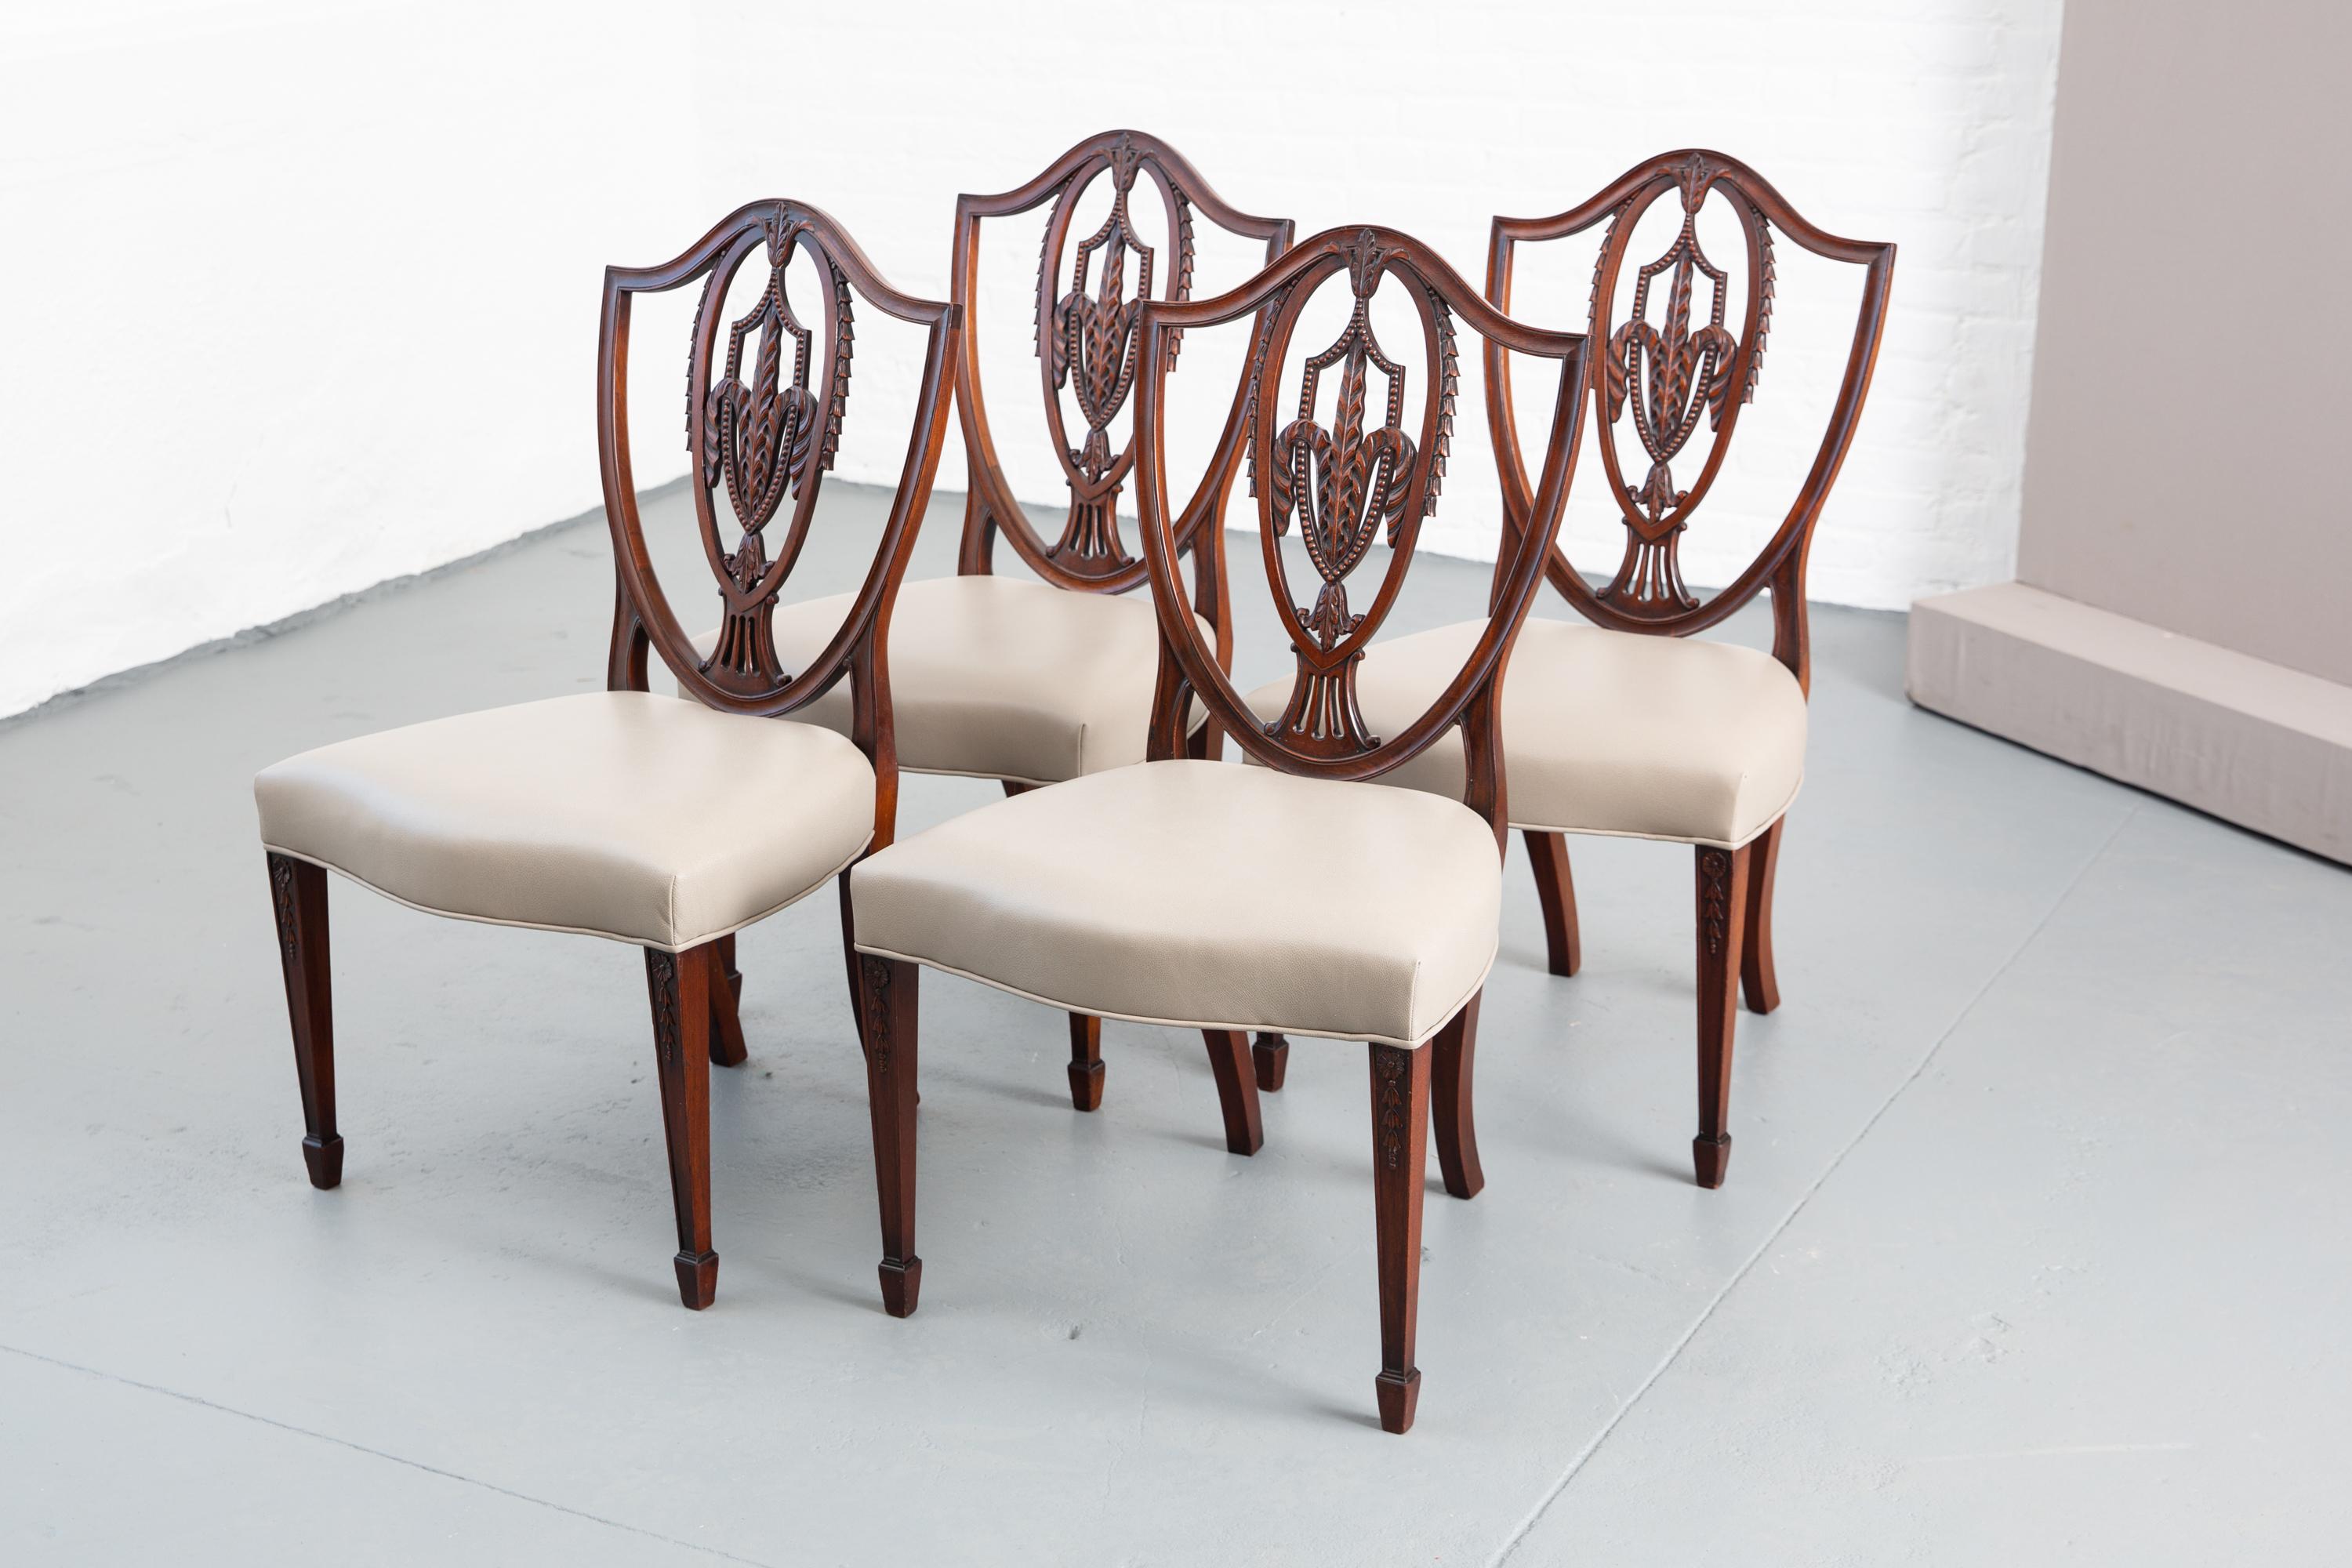 North American Fine Set of 4 Federal Hemplewhite Style Carved Wood Dining Chairs